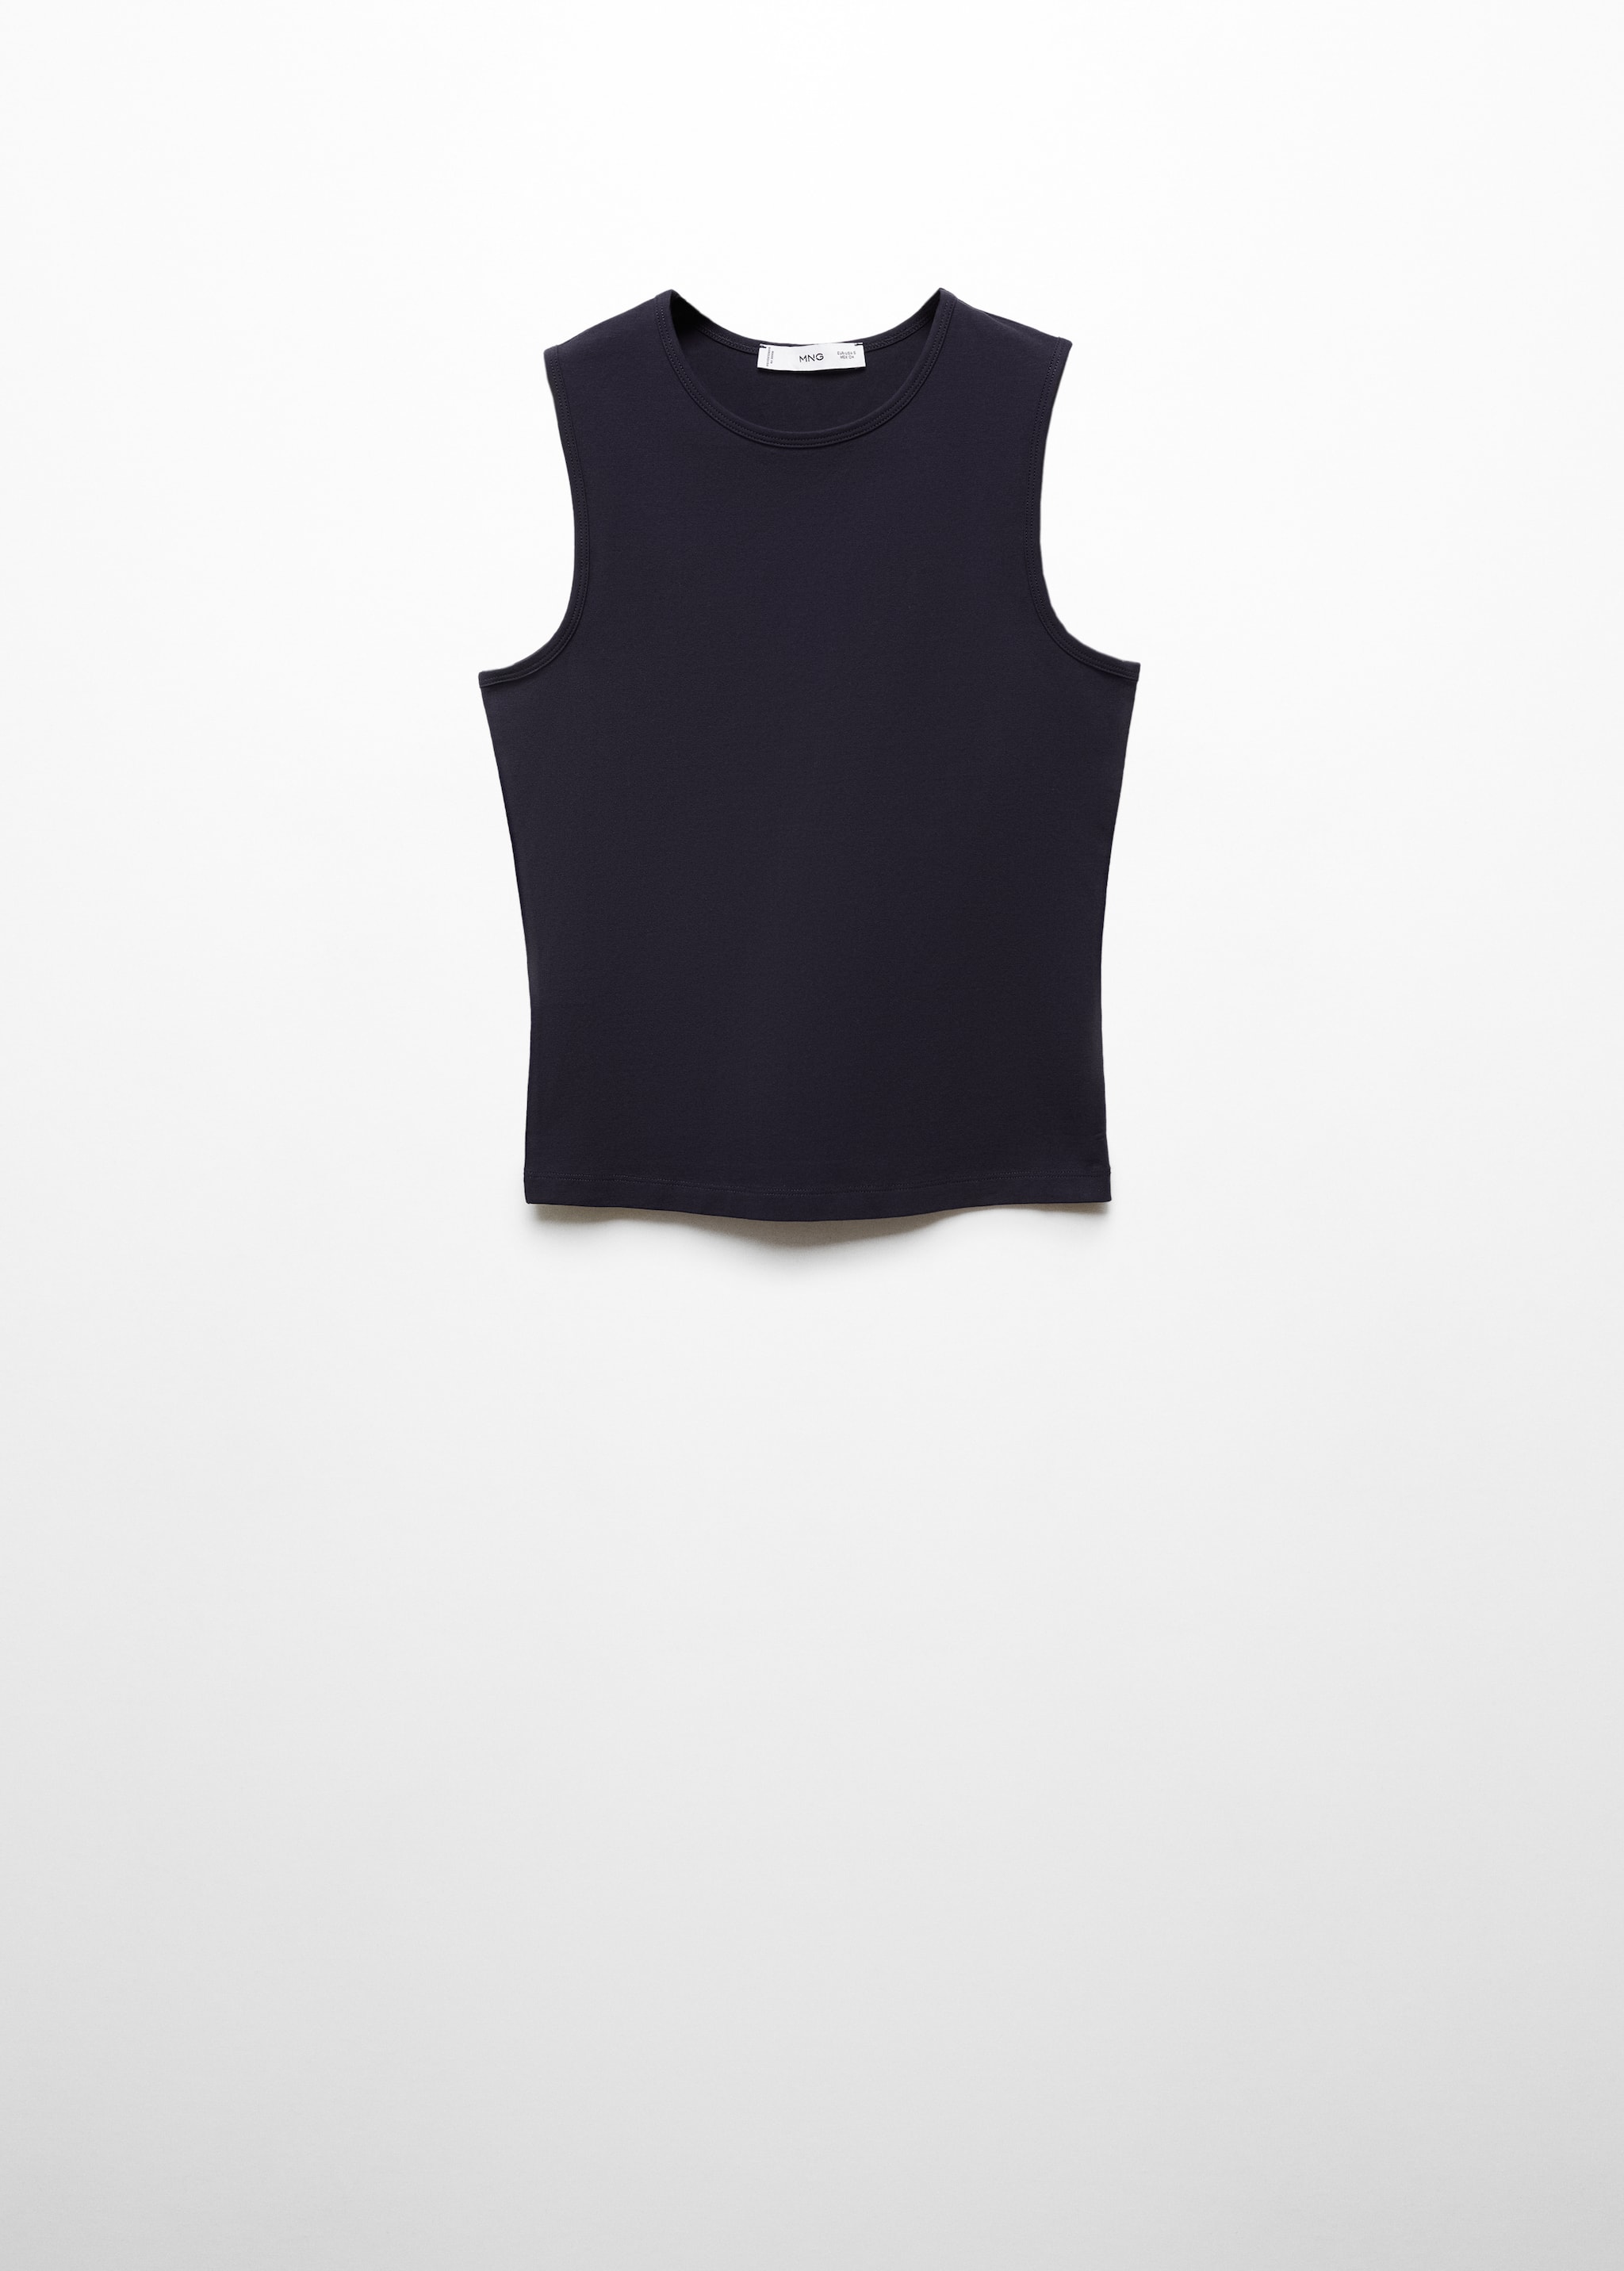 Cotton tank top - Article without model